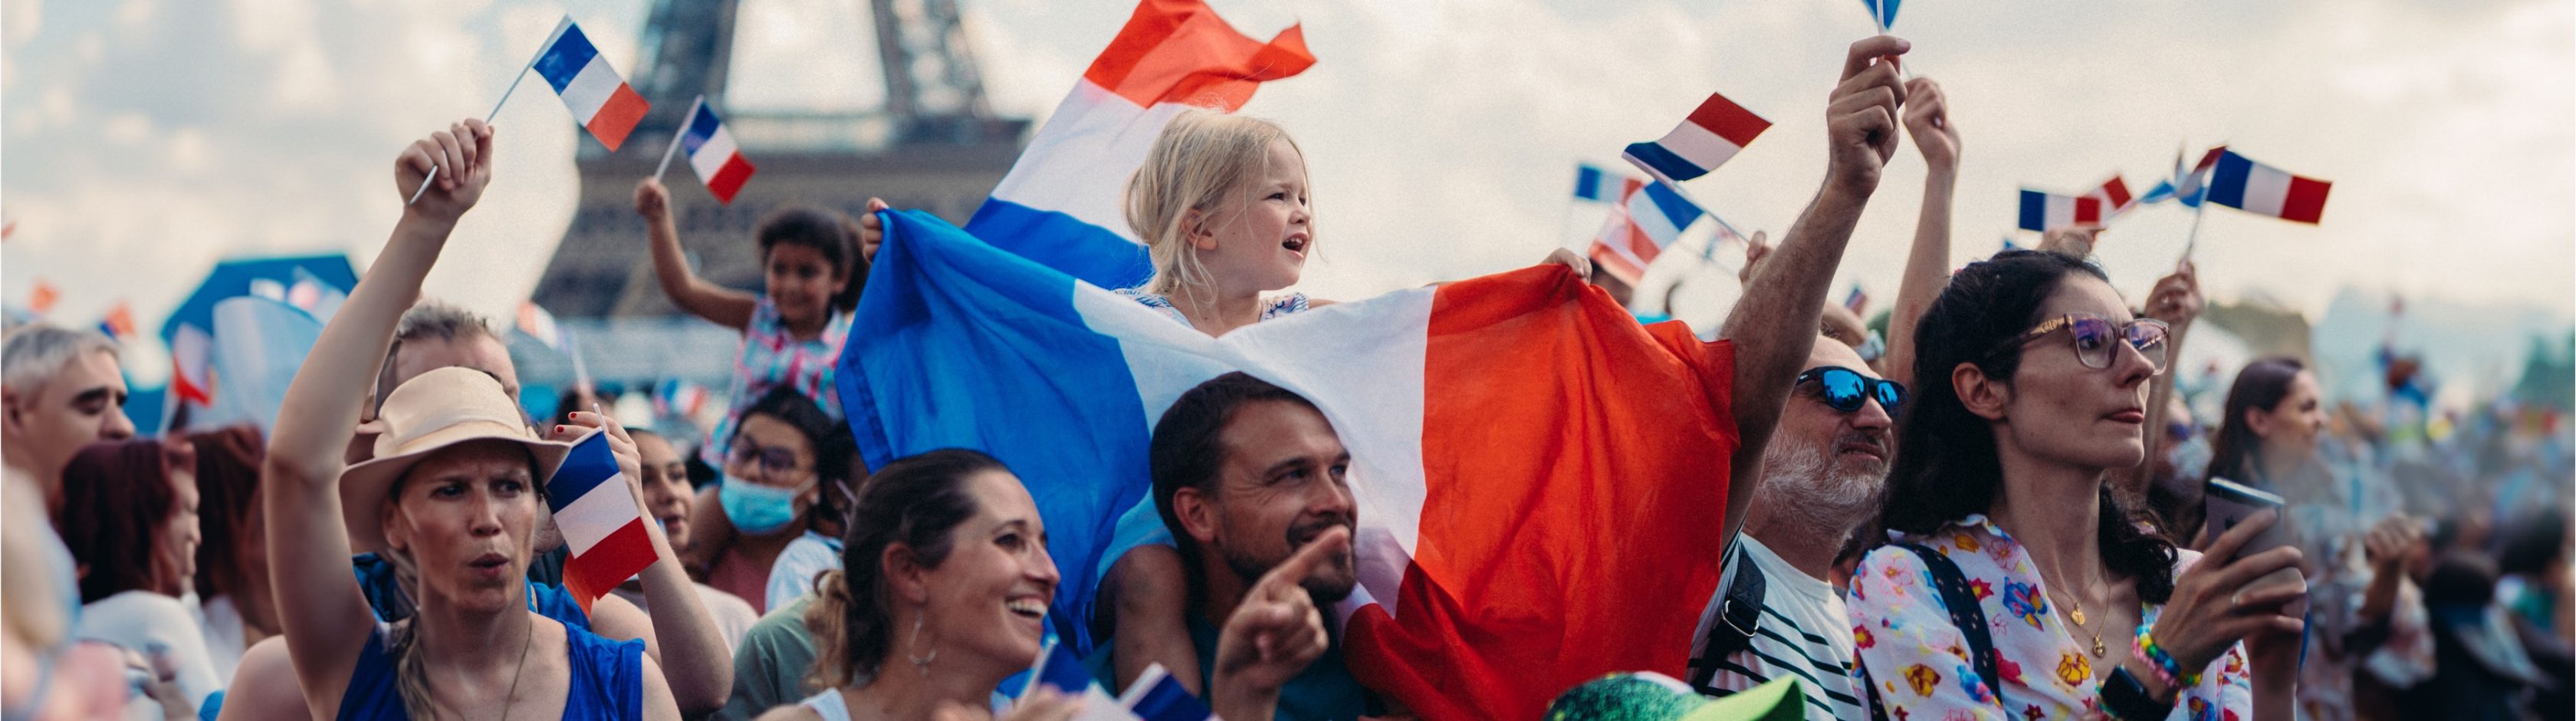 Crowd of cheering fans, girl on her father's shoulders with many waving France flags, the Eiffel Tower in the background